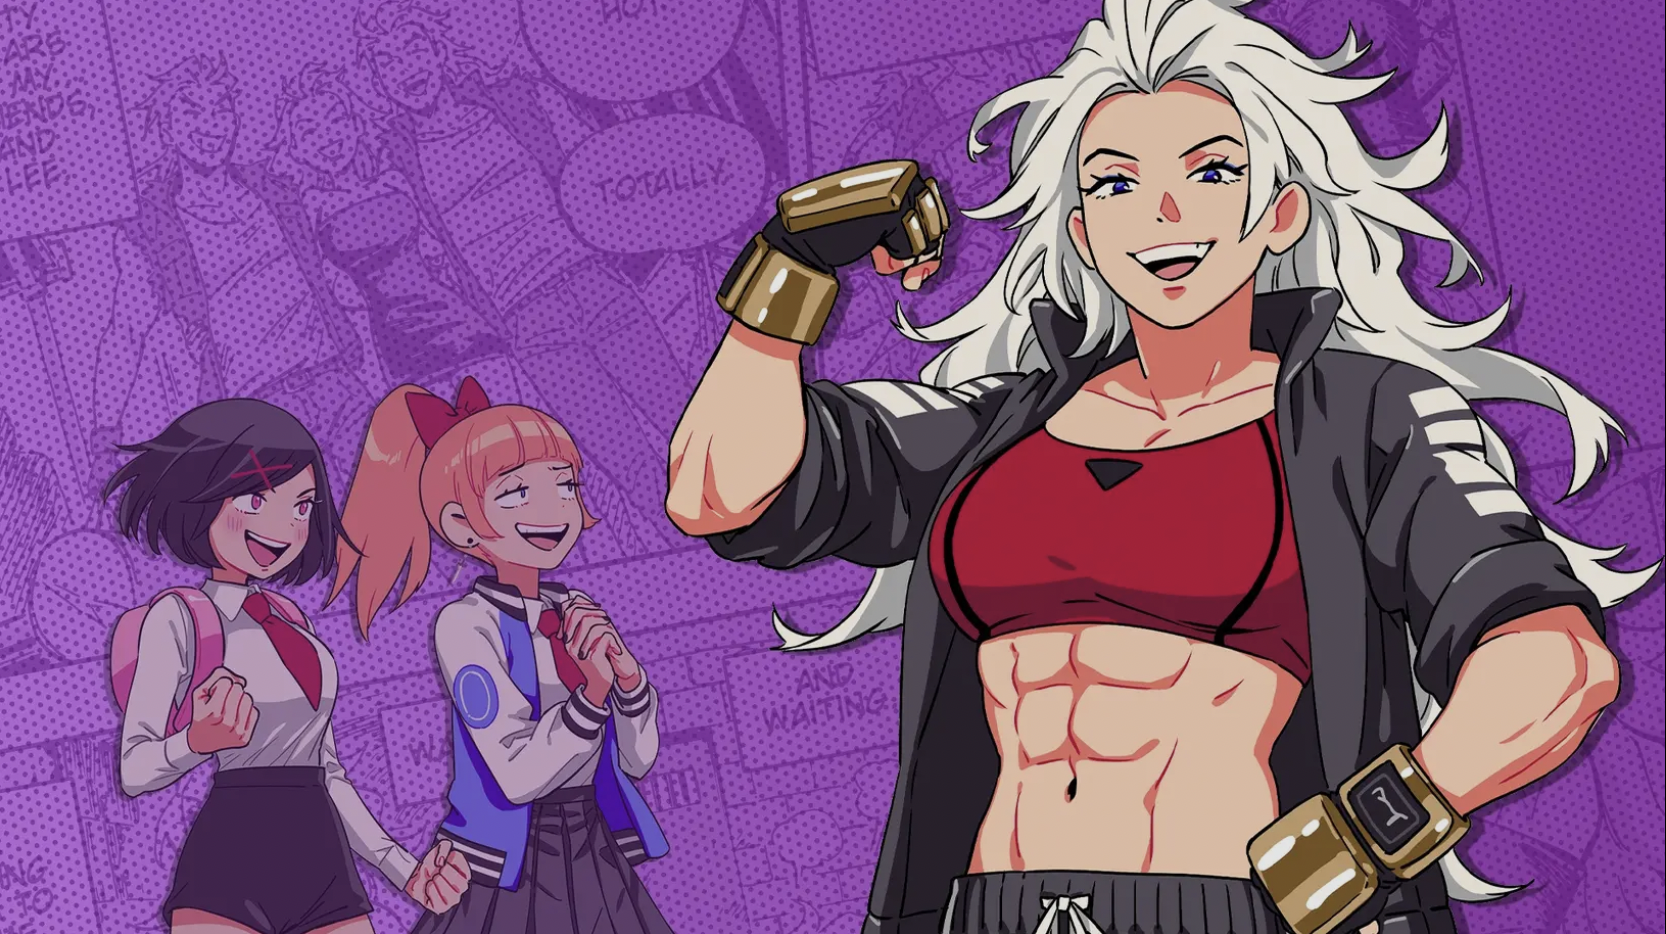 The latest River City Girls 2 trailer takes time to highlight Marian, a character from the Double Dragon series.